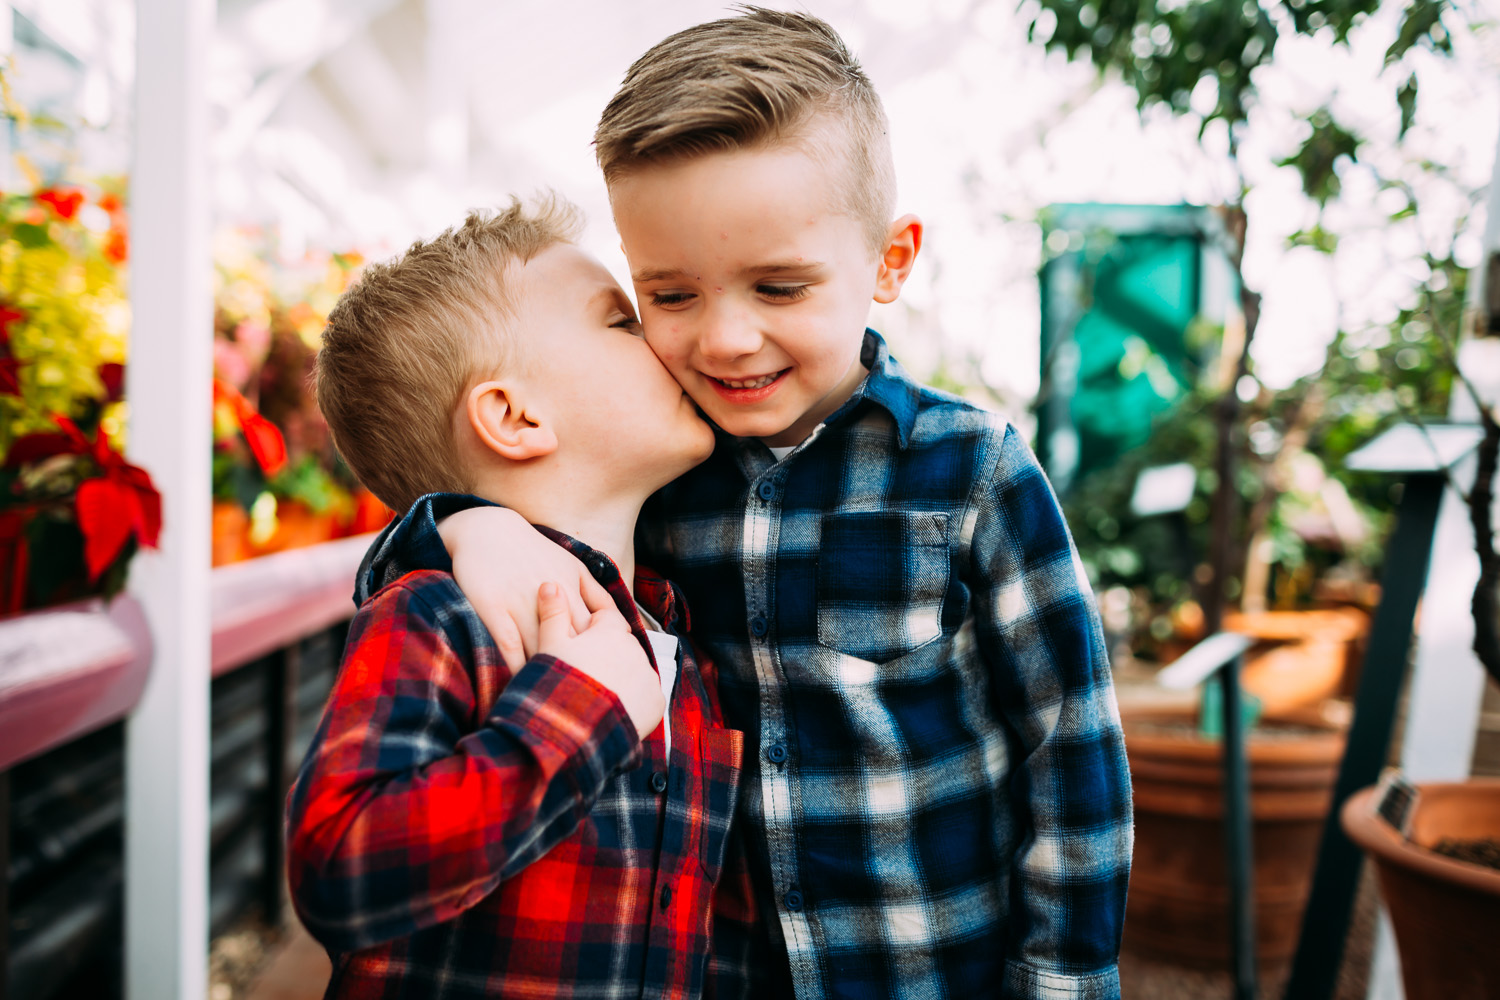 two brothers under 5s hugging and kissing each other in plaid shirts